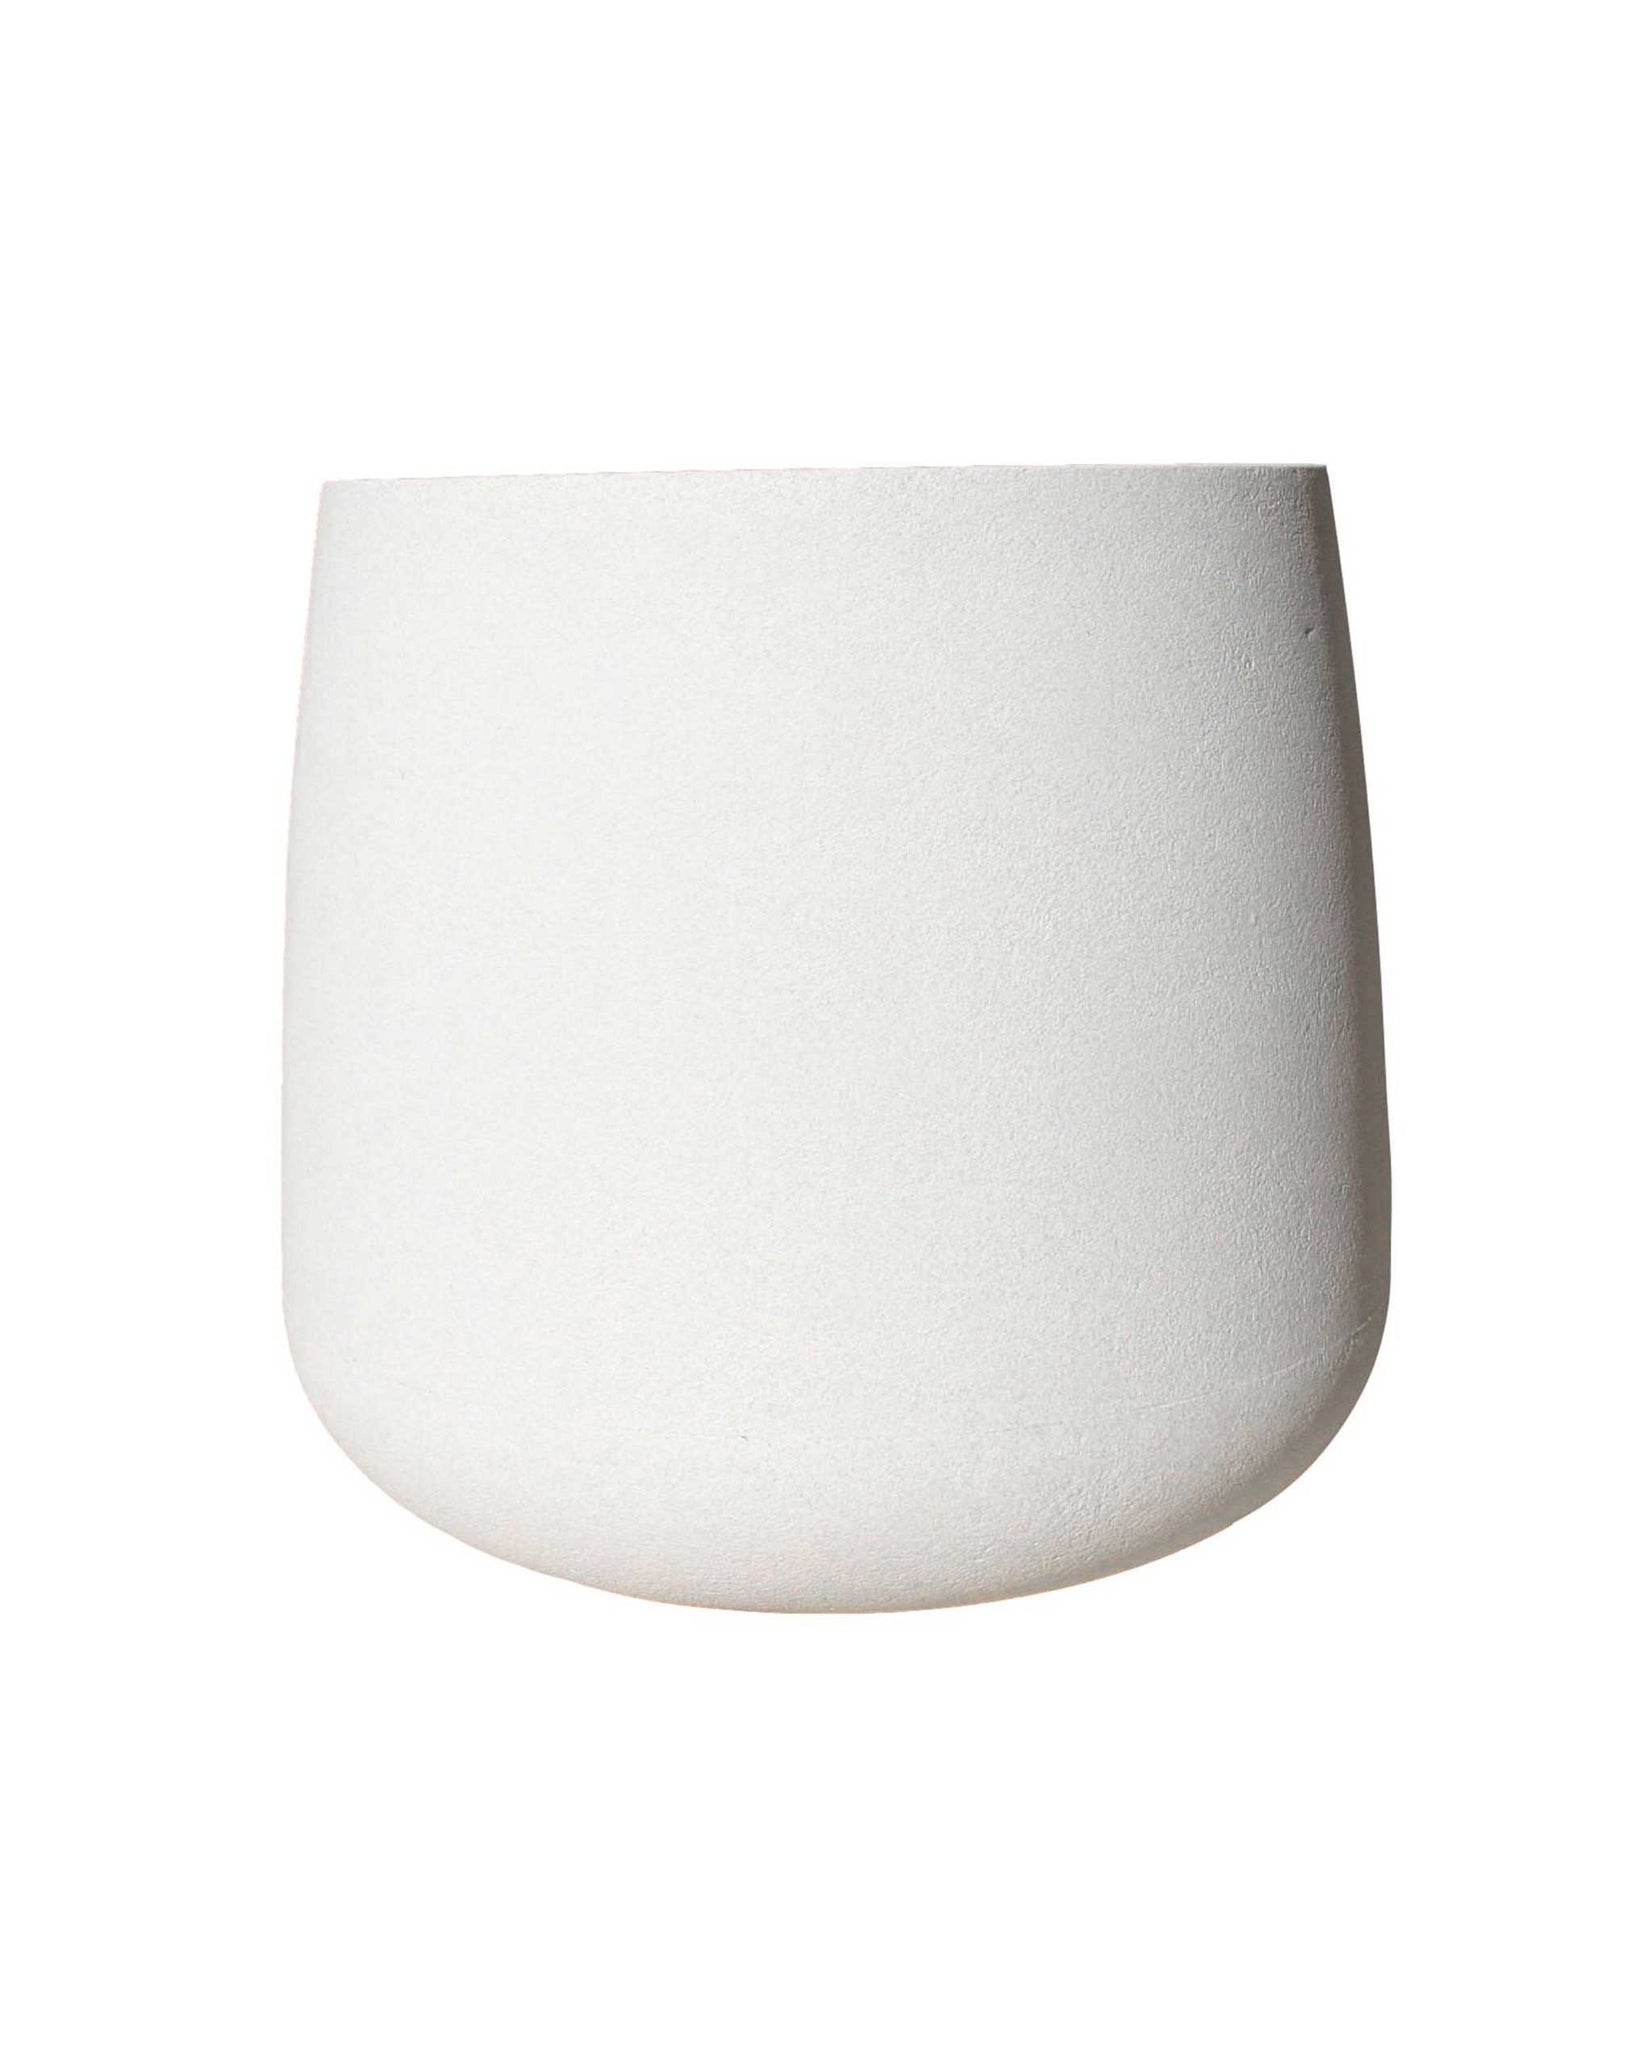 Side view of the medium Bios plant pot showing  the beautiful  textured finish and clean straight upright lines of the pot in colour off-white